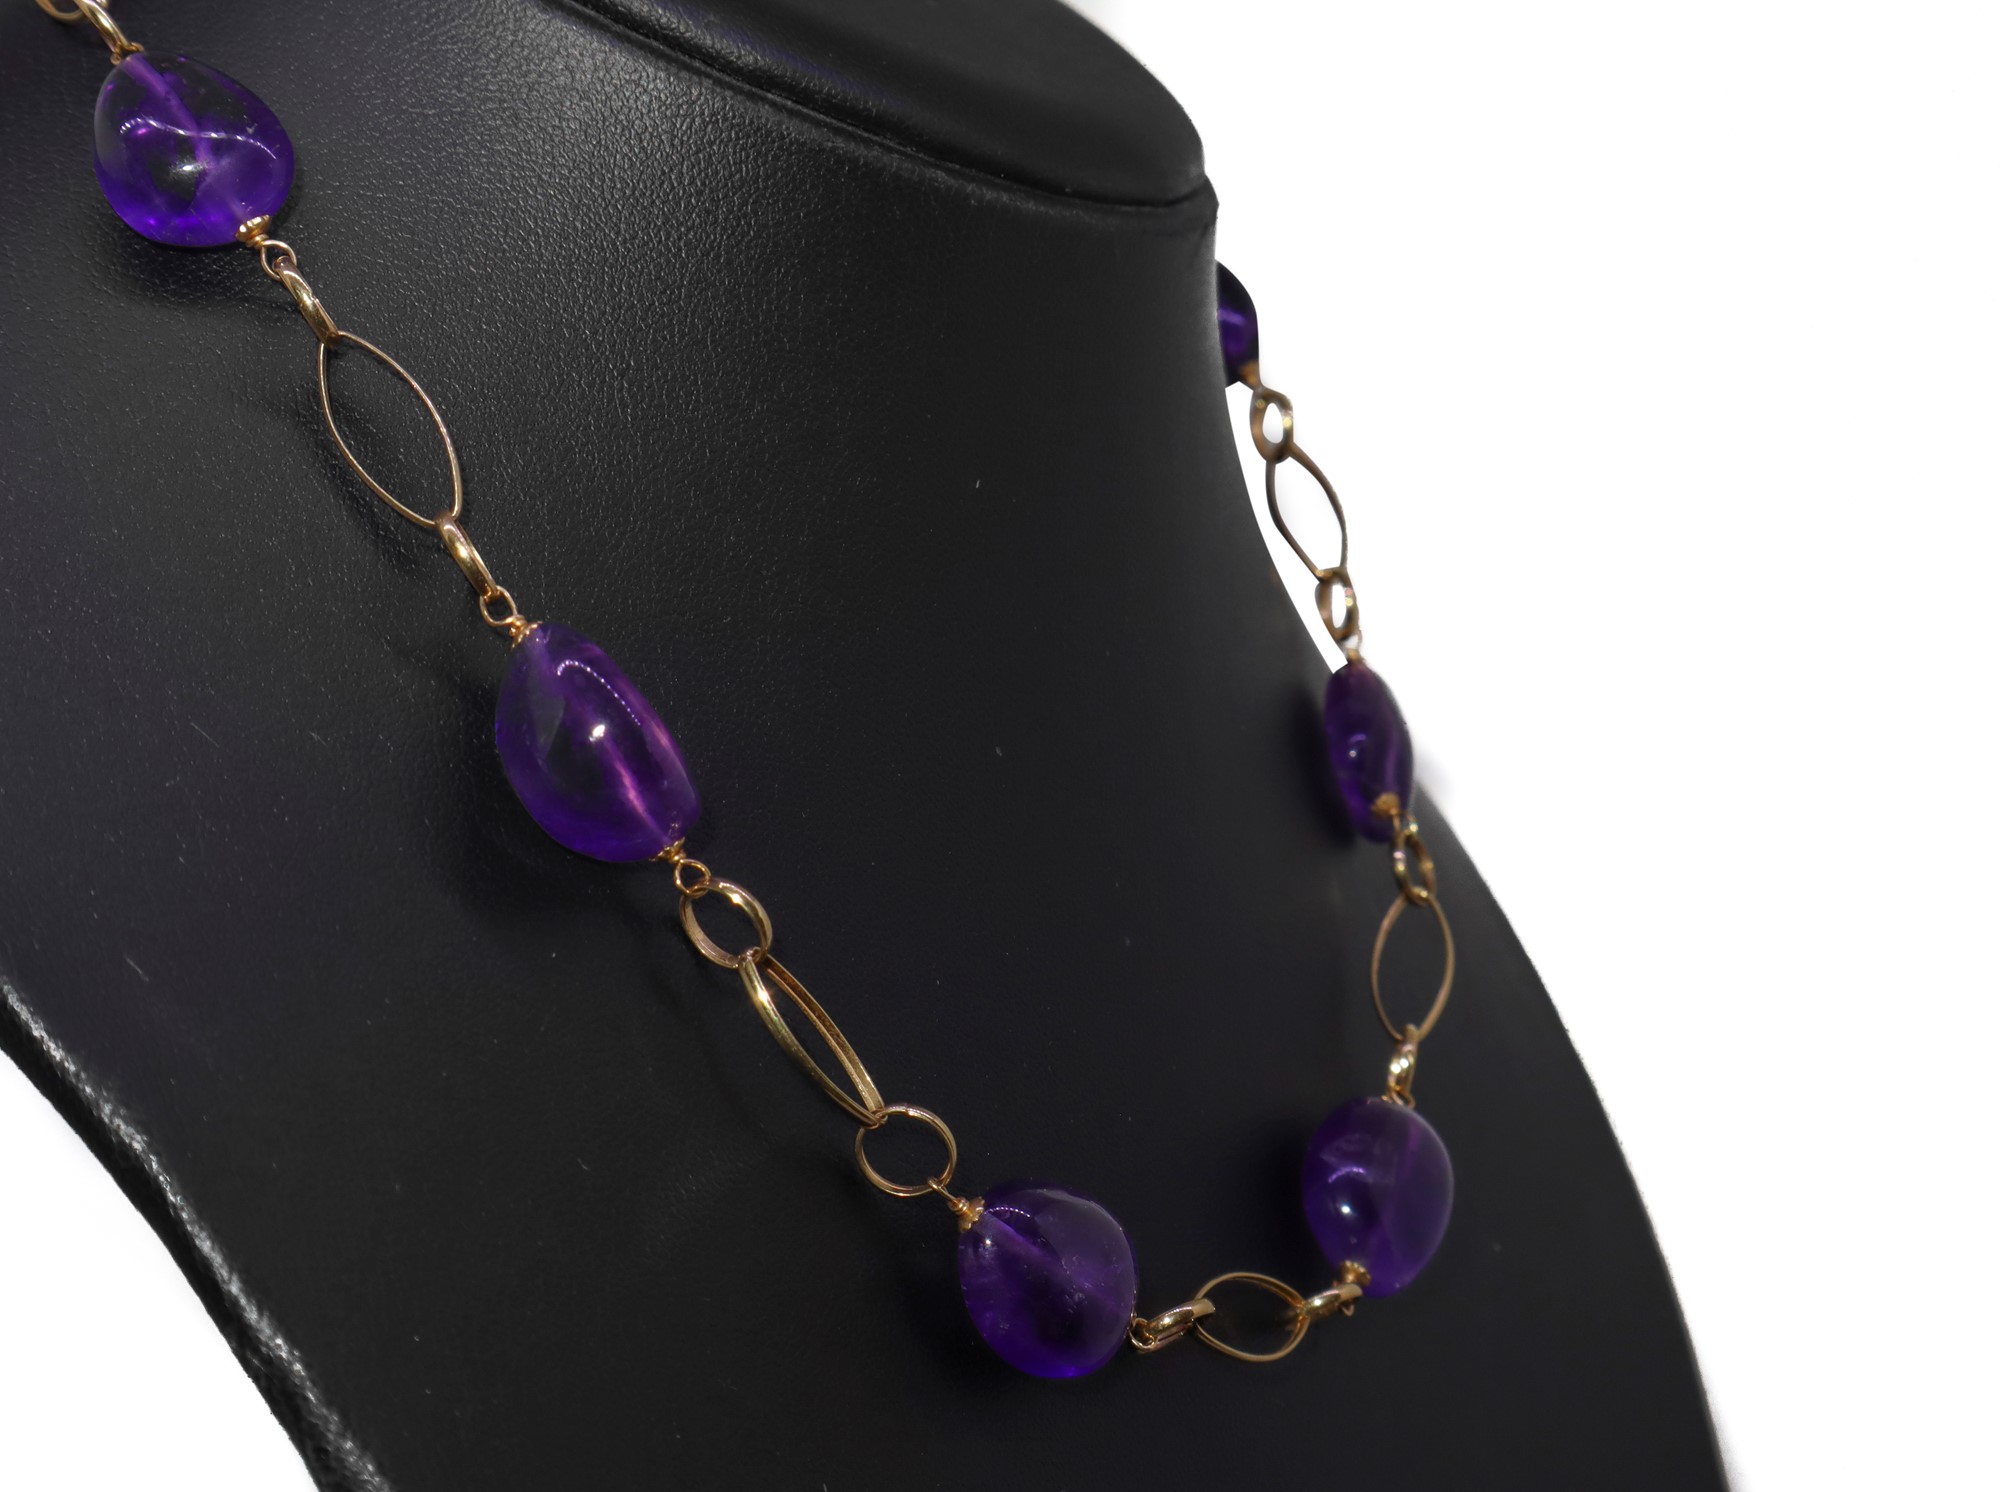 Gold necklace with amethysts - Image 3 of 4